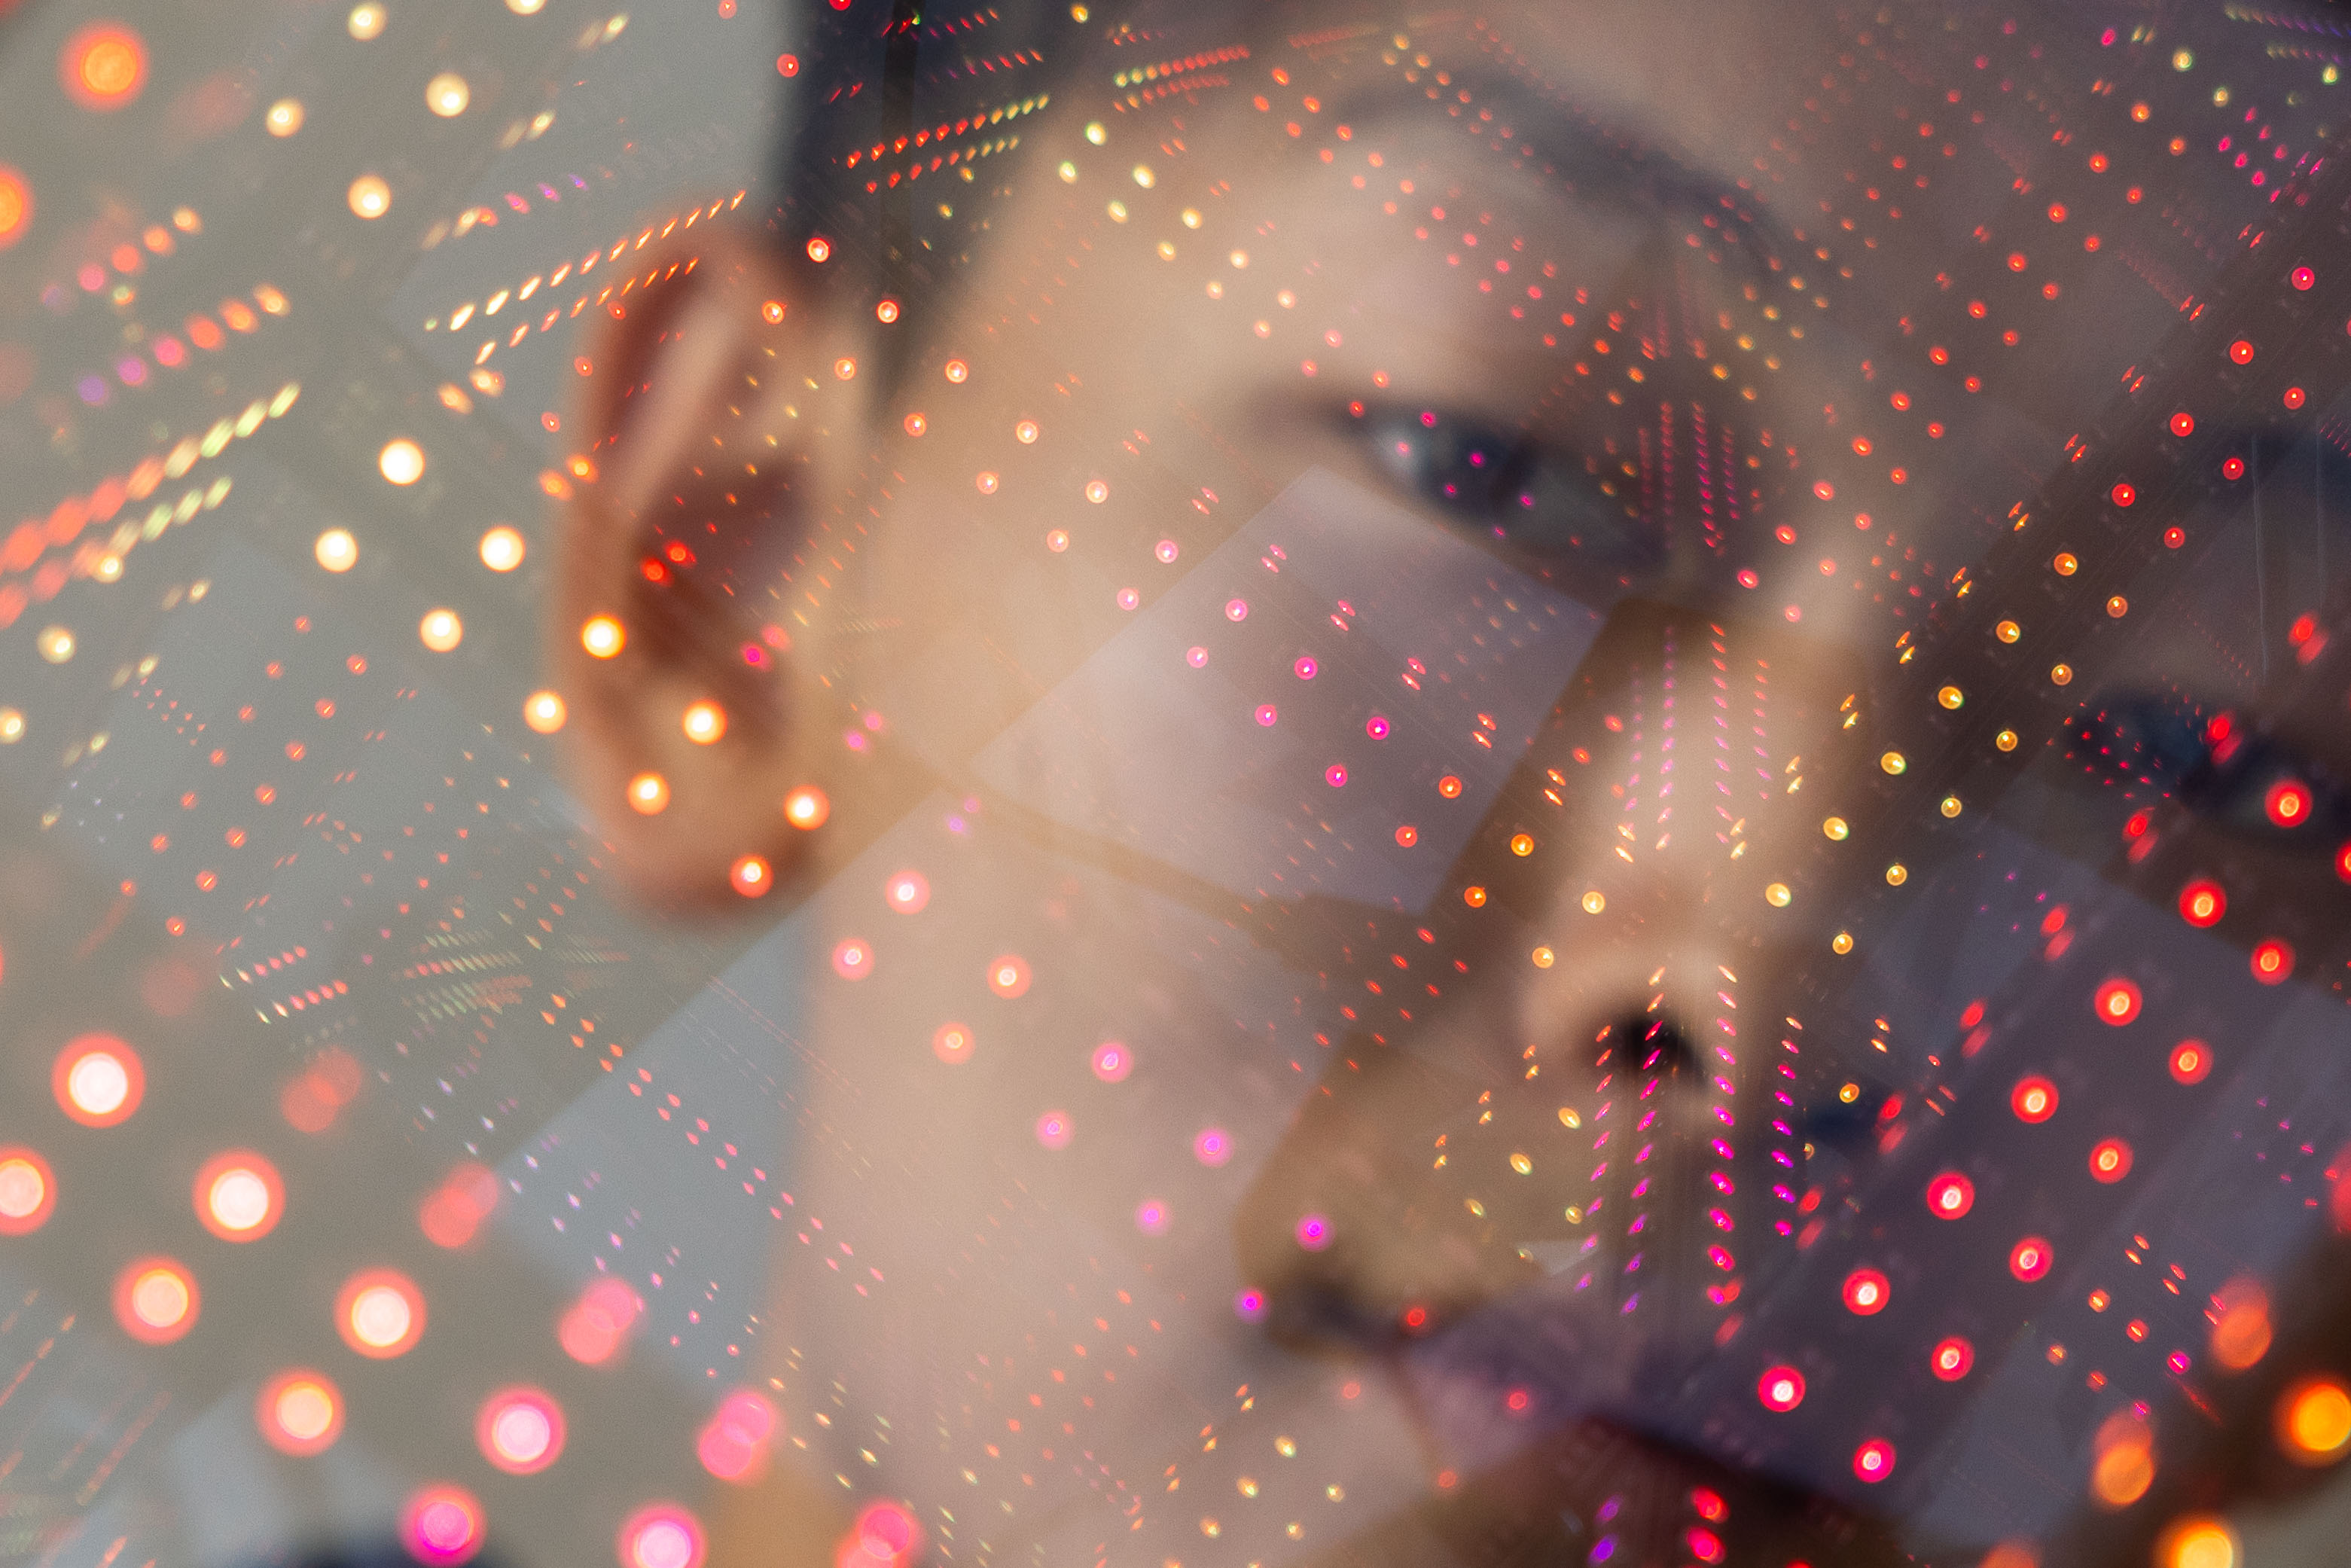 The image features a person's blurry face overlaid with a grid of bright, colorful LED lights, creating a futuristic and abstract effect.